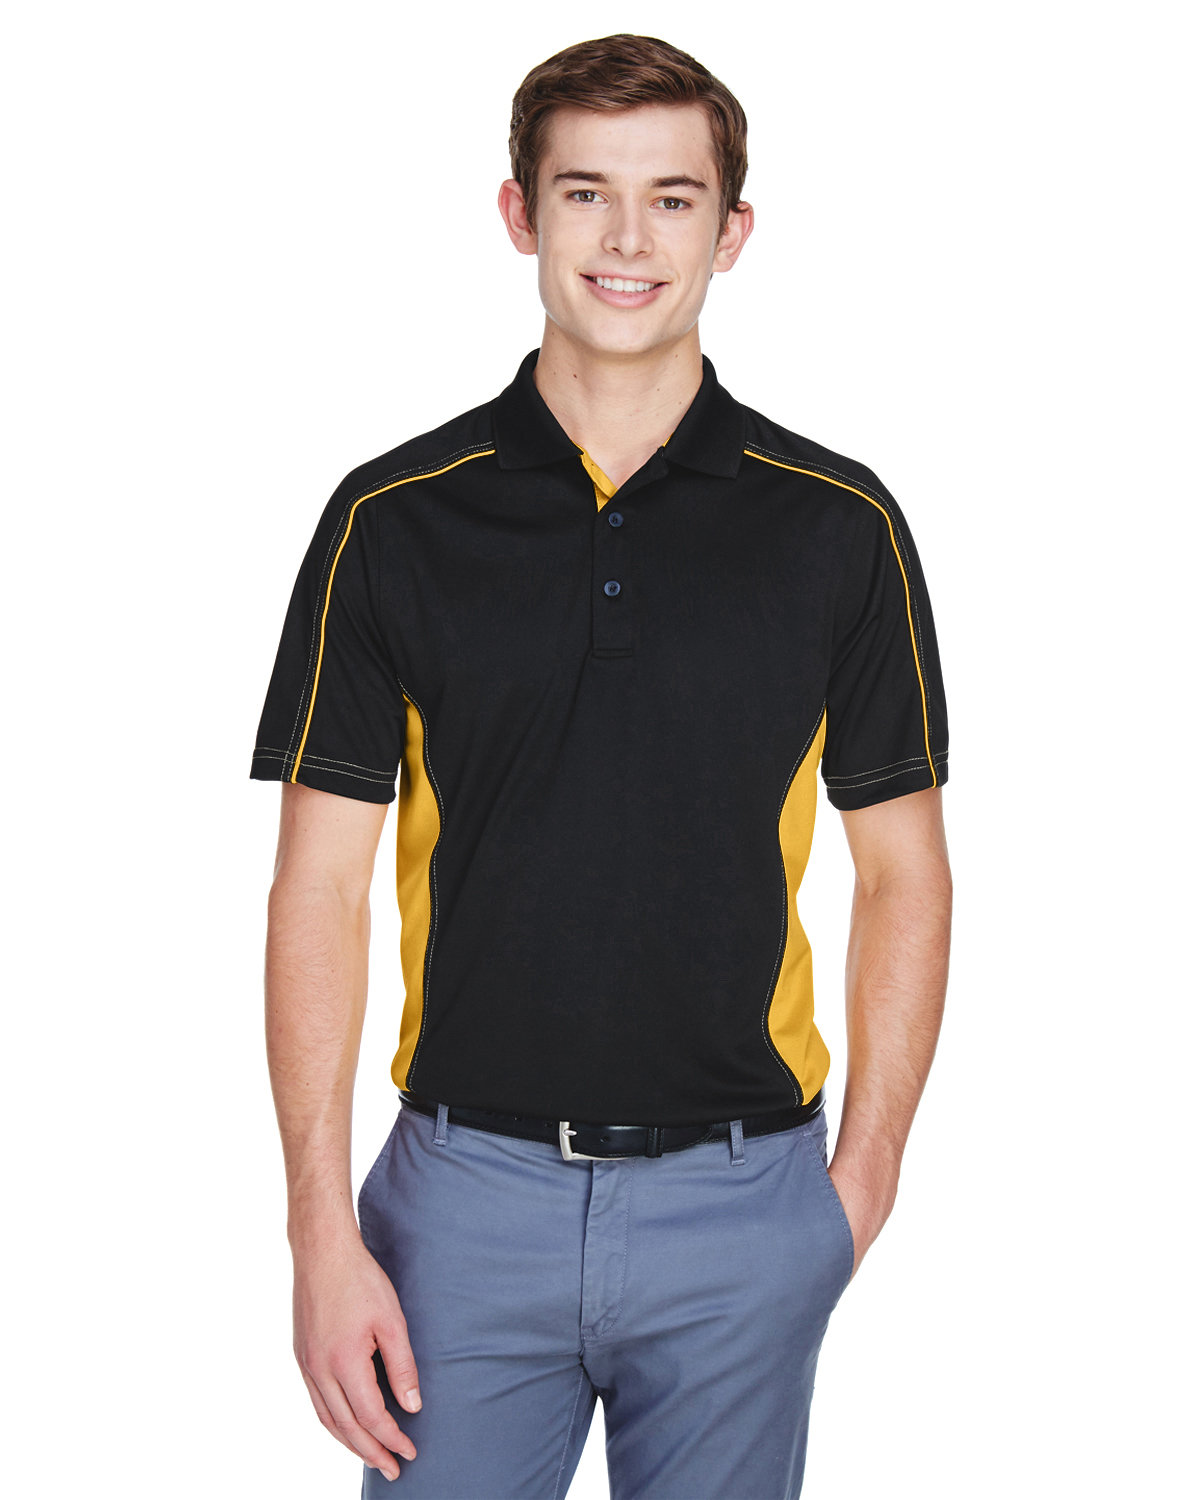 Extreme Men's Eperformance™ Fuse Snag Protection Plus Colorblock Polo BLK/ CMPS GOLD 